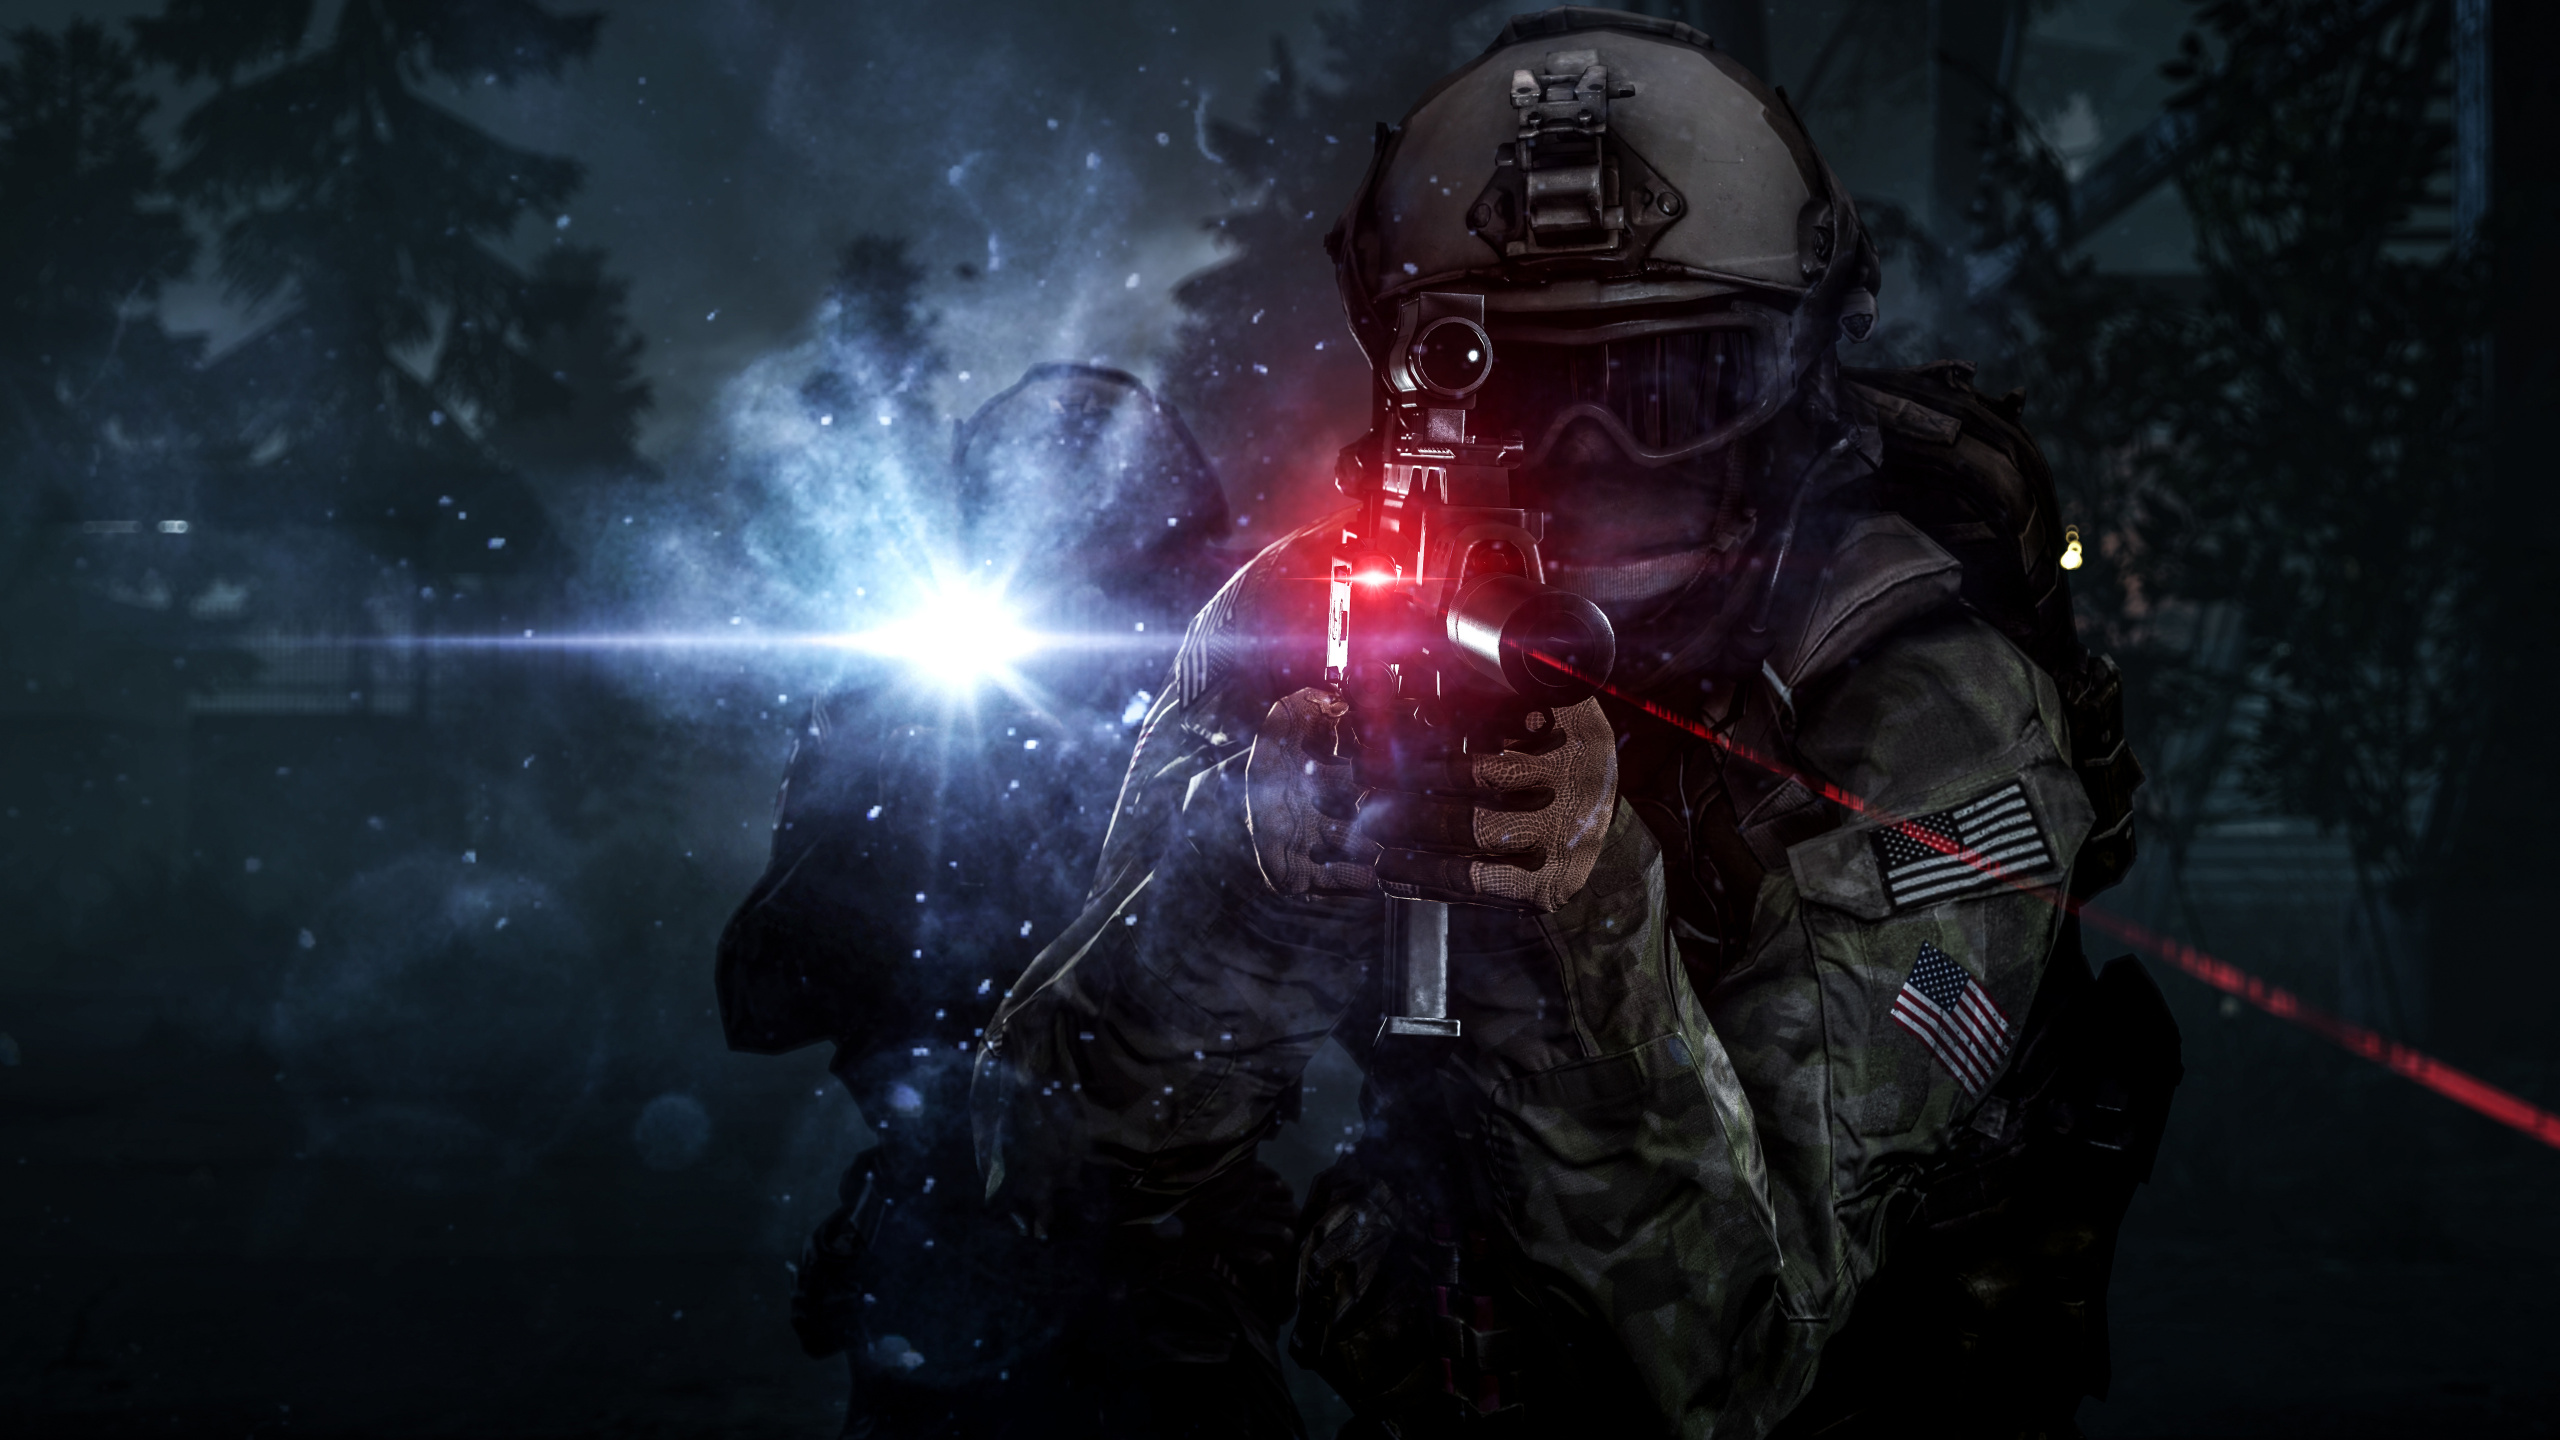 pc Game, Darkness, Space, Android, Battlefield 4. Wallpaper in 2560x1440 Resolution